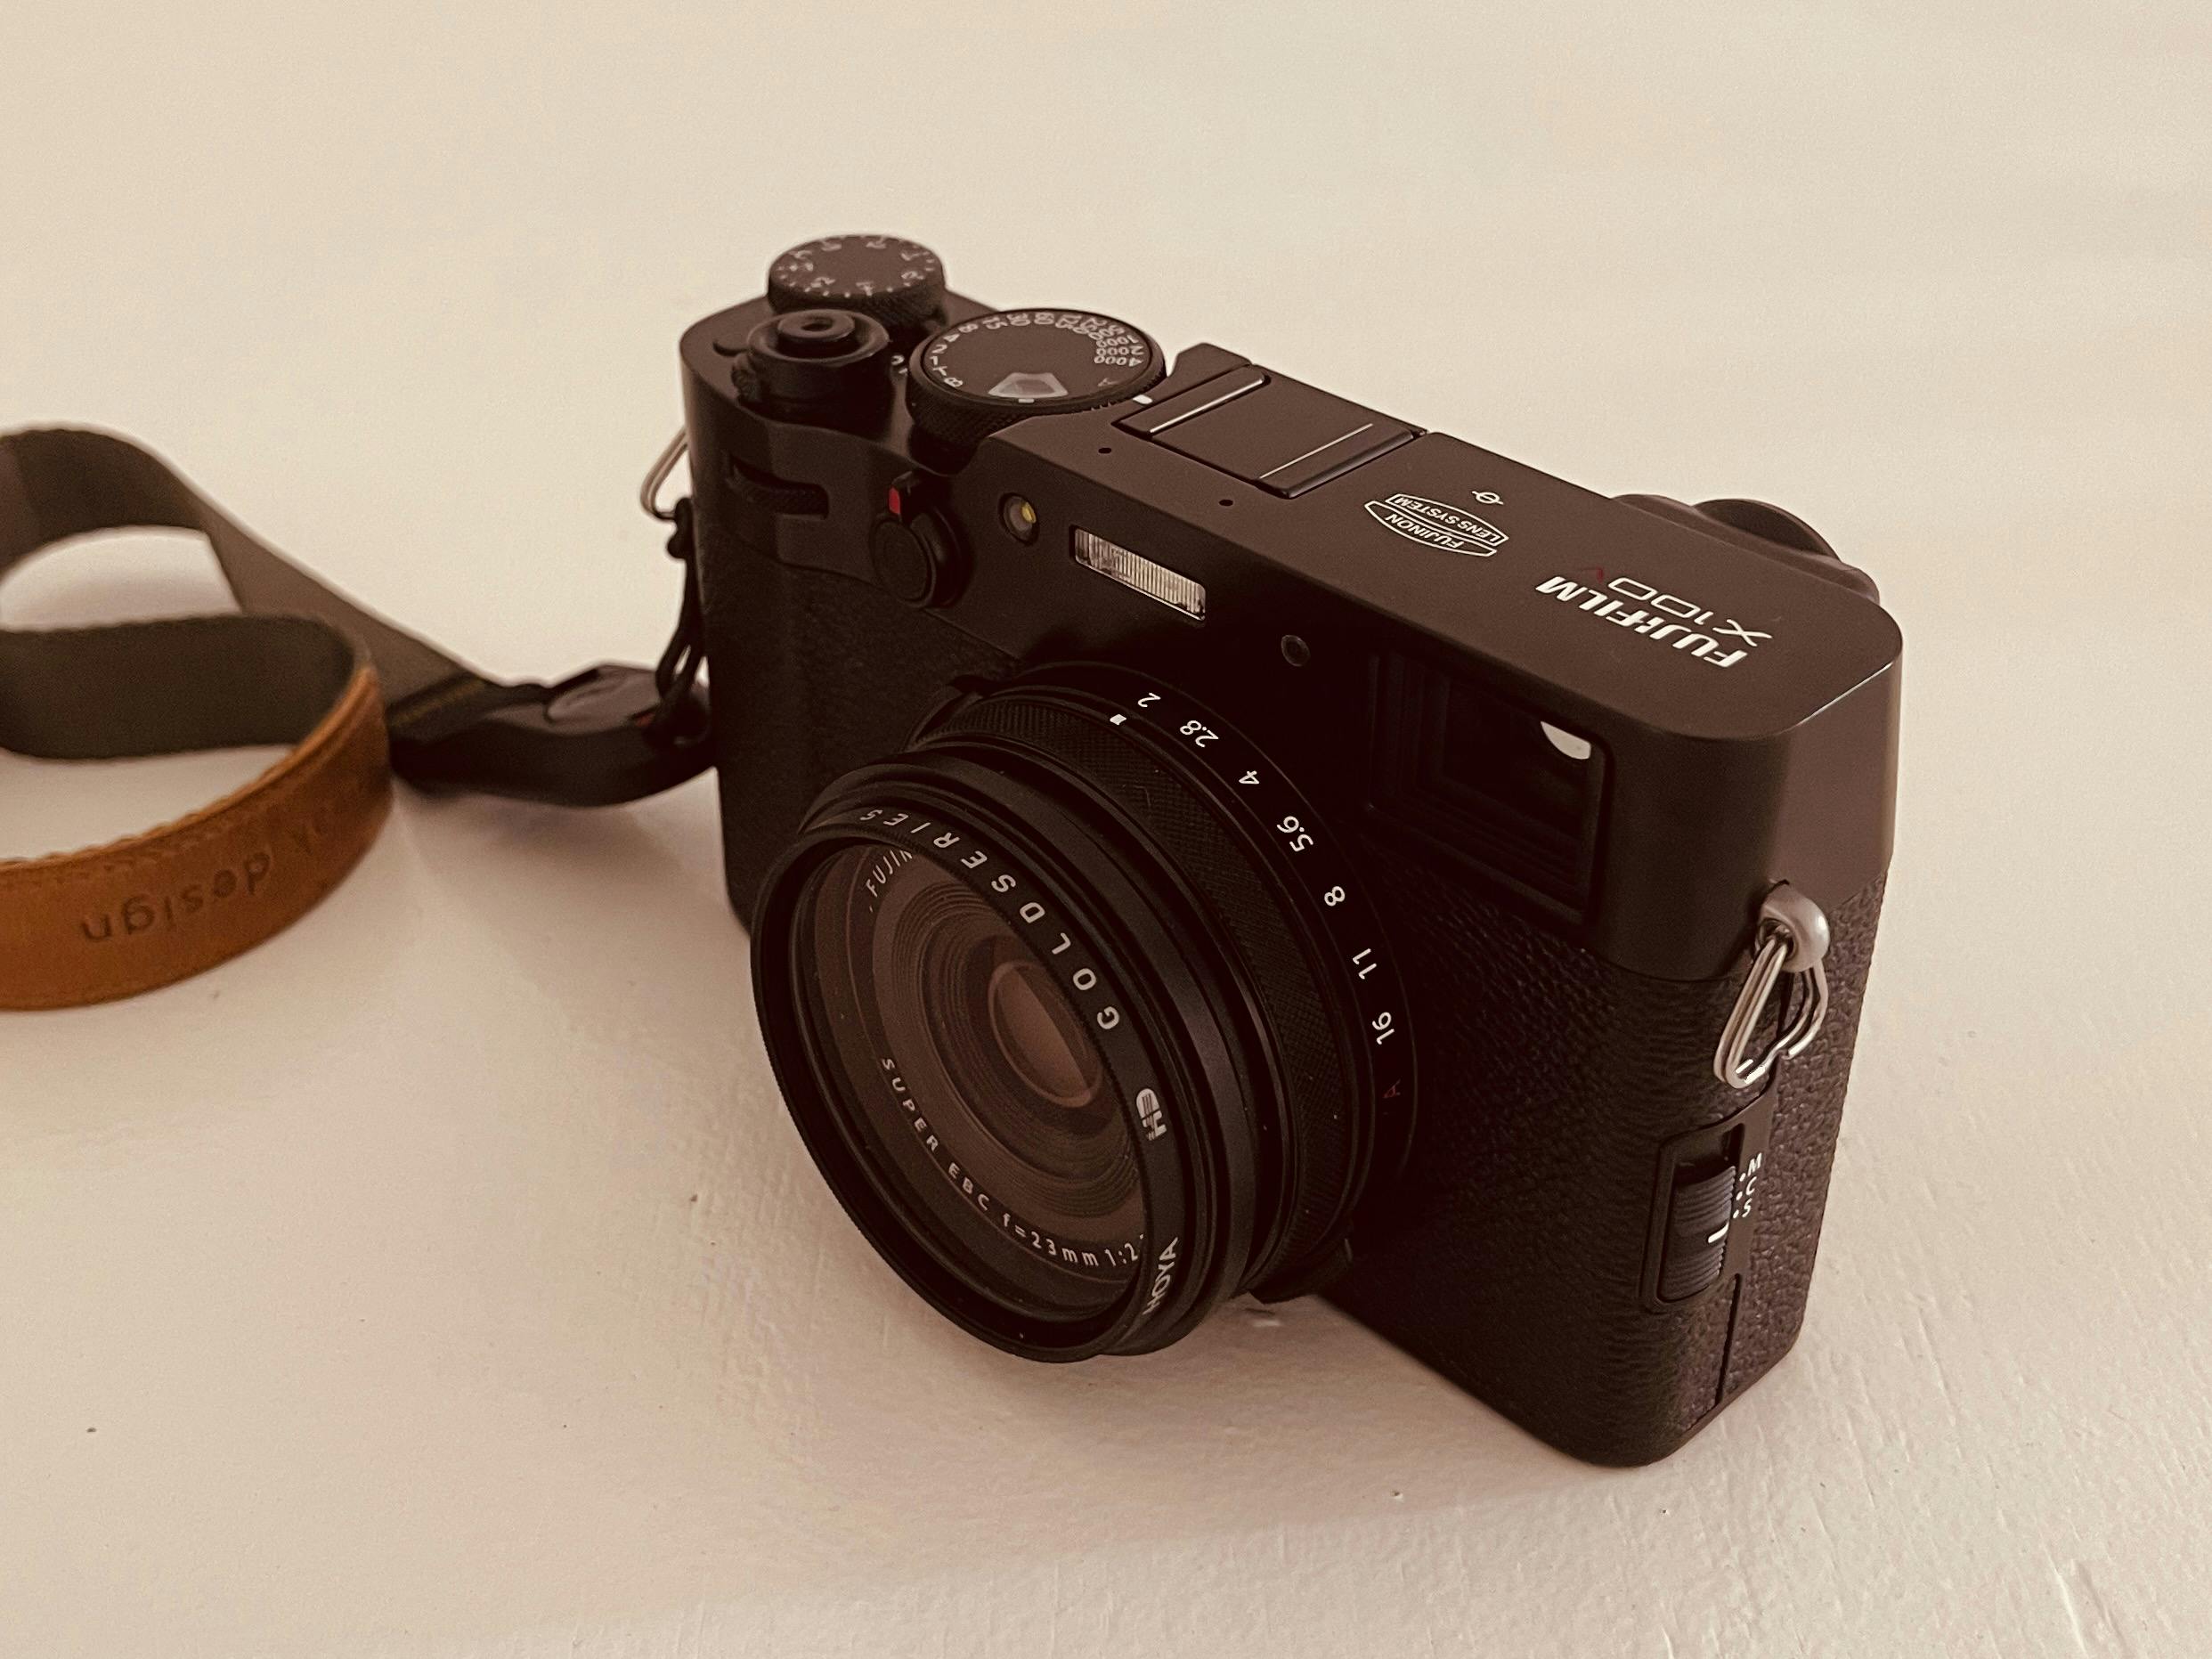 Thoughts on the Fujifilm x100v